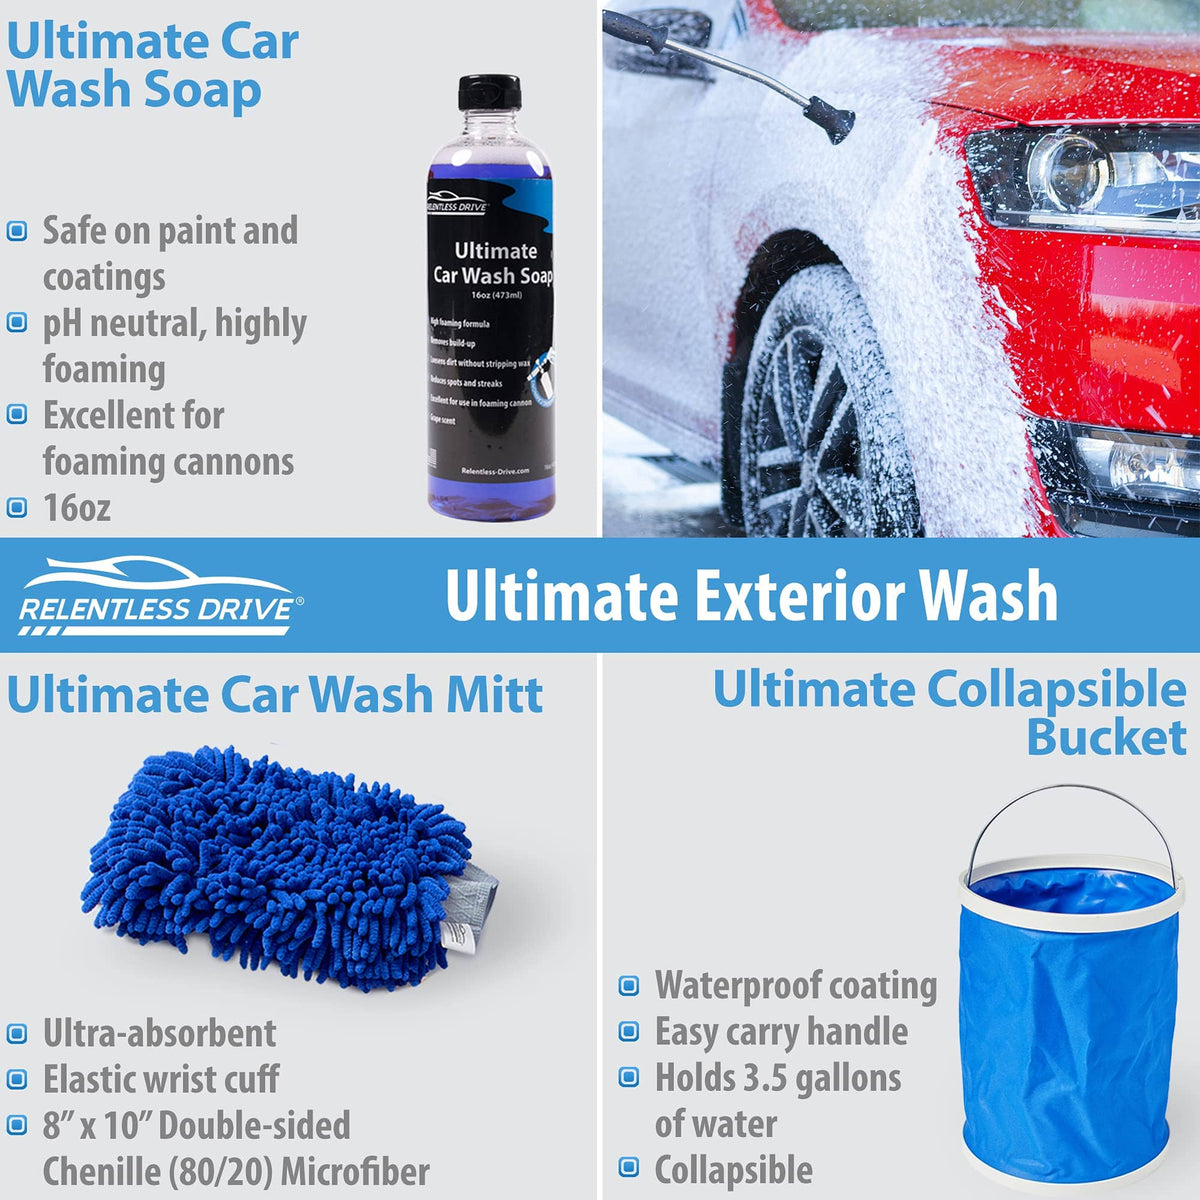 Car Cleaning Accessories Archives - Glitter Collection